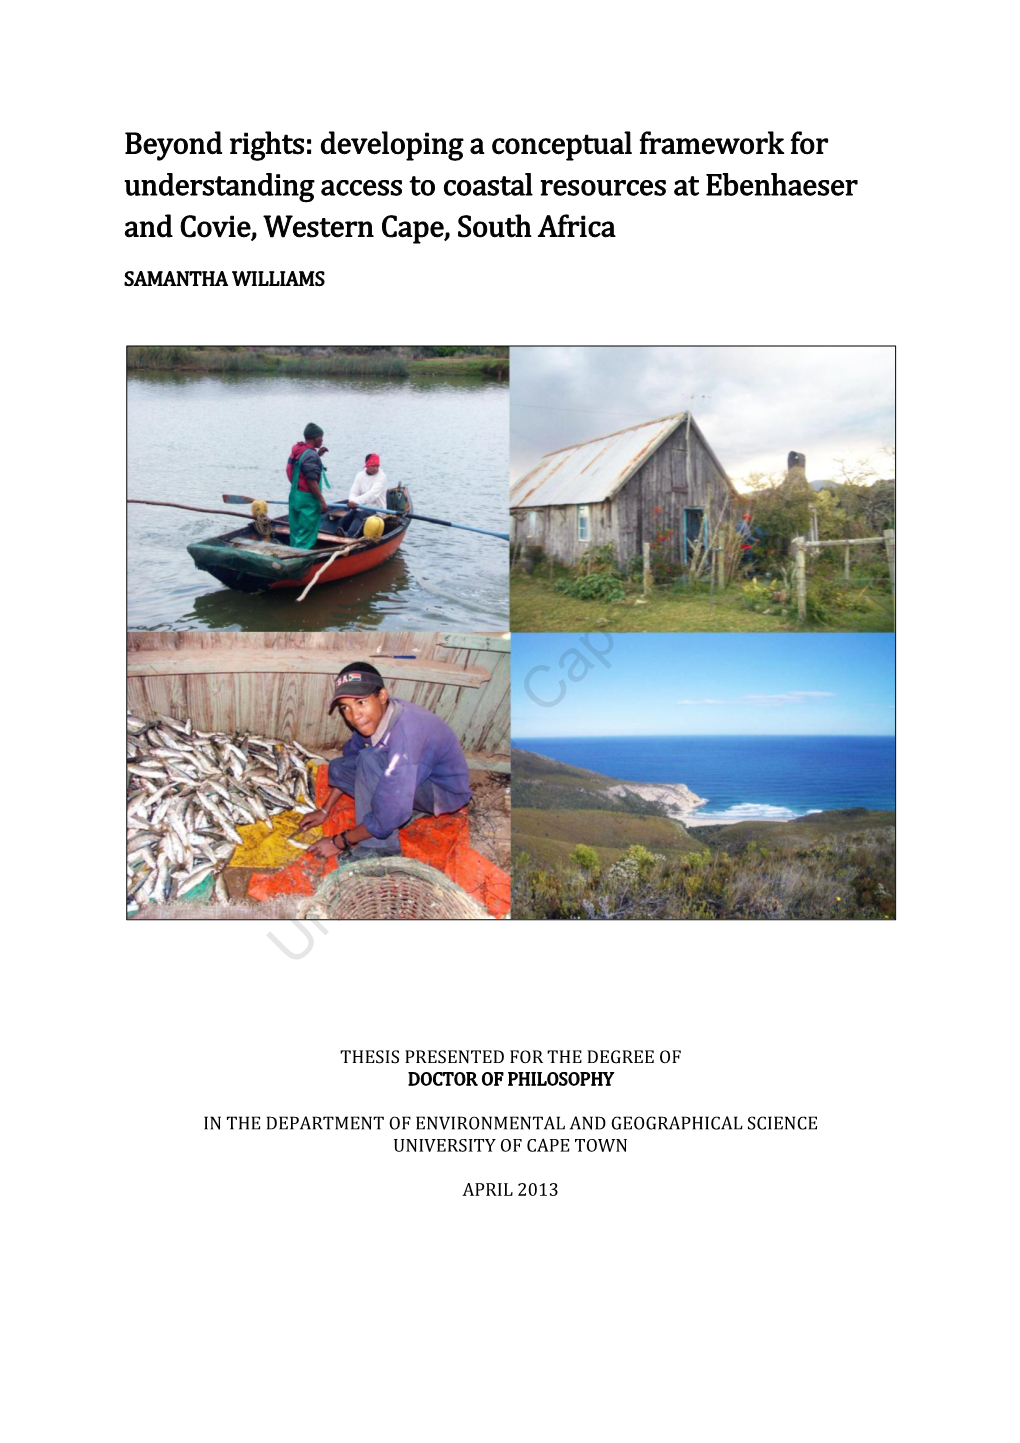 Beyond Rights: Developing a Conceptual Framework for Understanding Access to Coastal Resources at Ebenhauser and Covie , Western